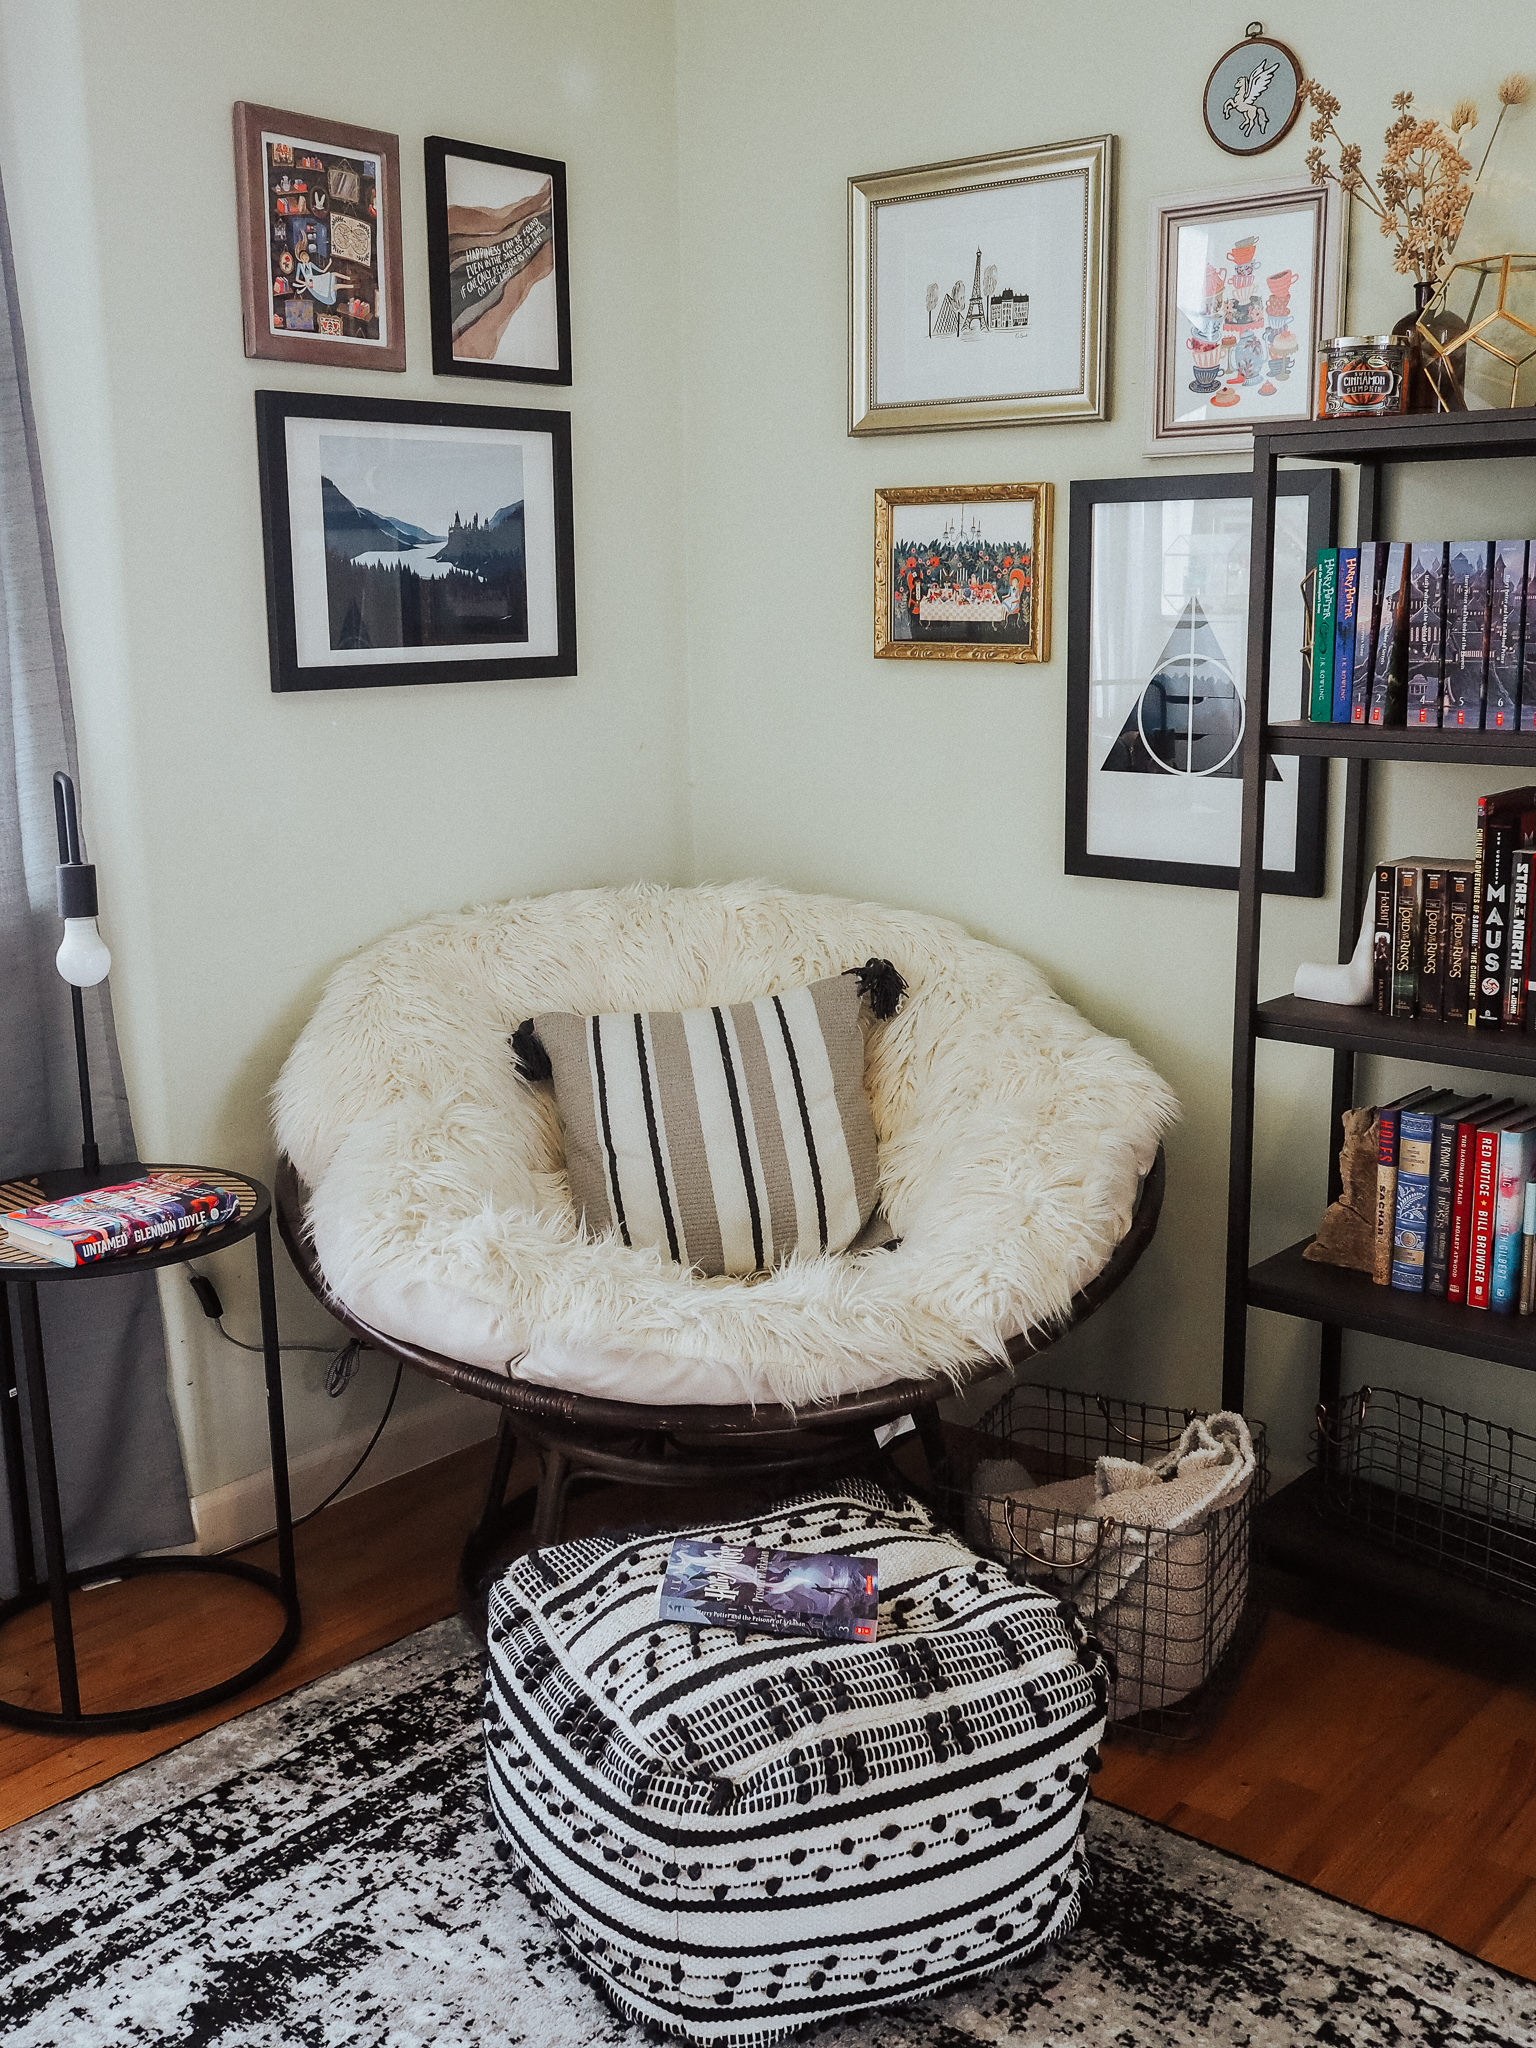 Kelsey from Blondes & Bagels shares her cozy reading corner in this han...